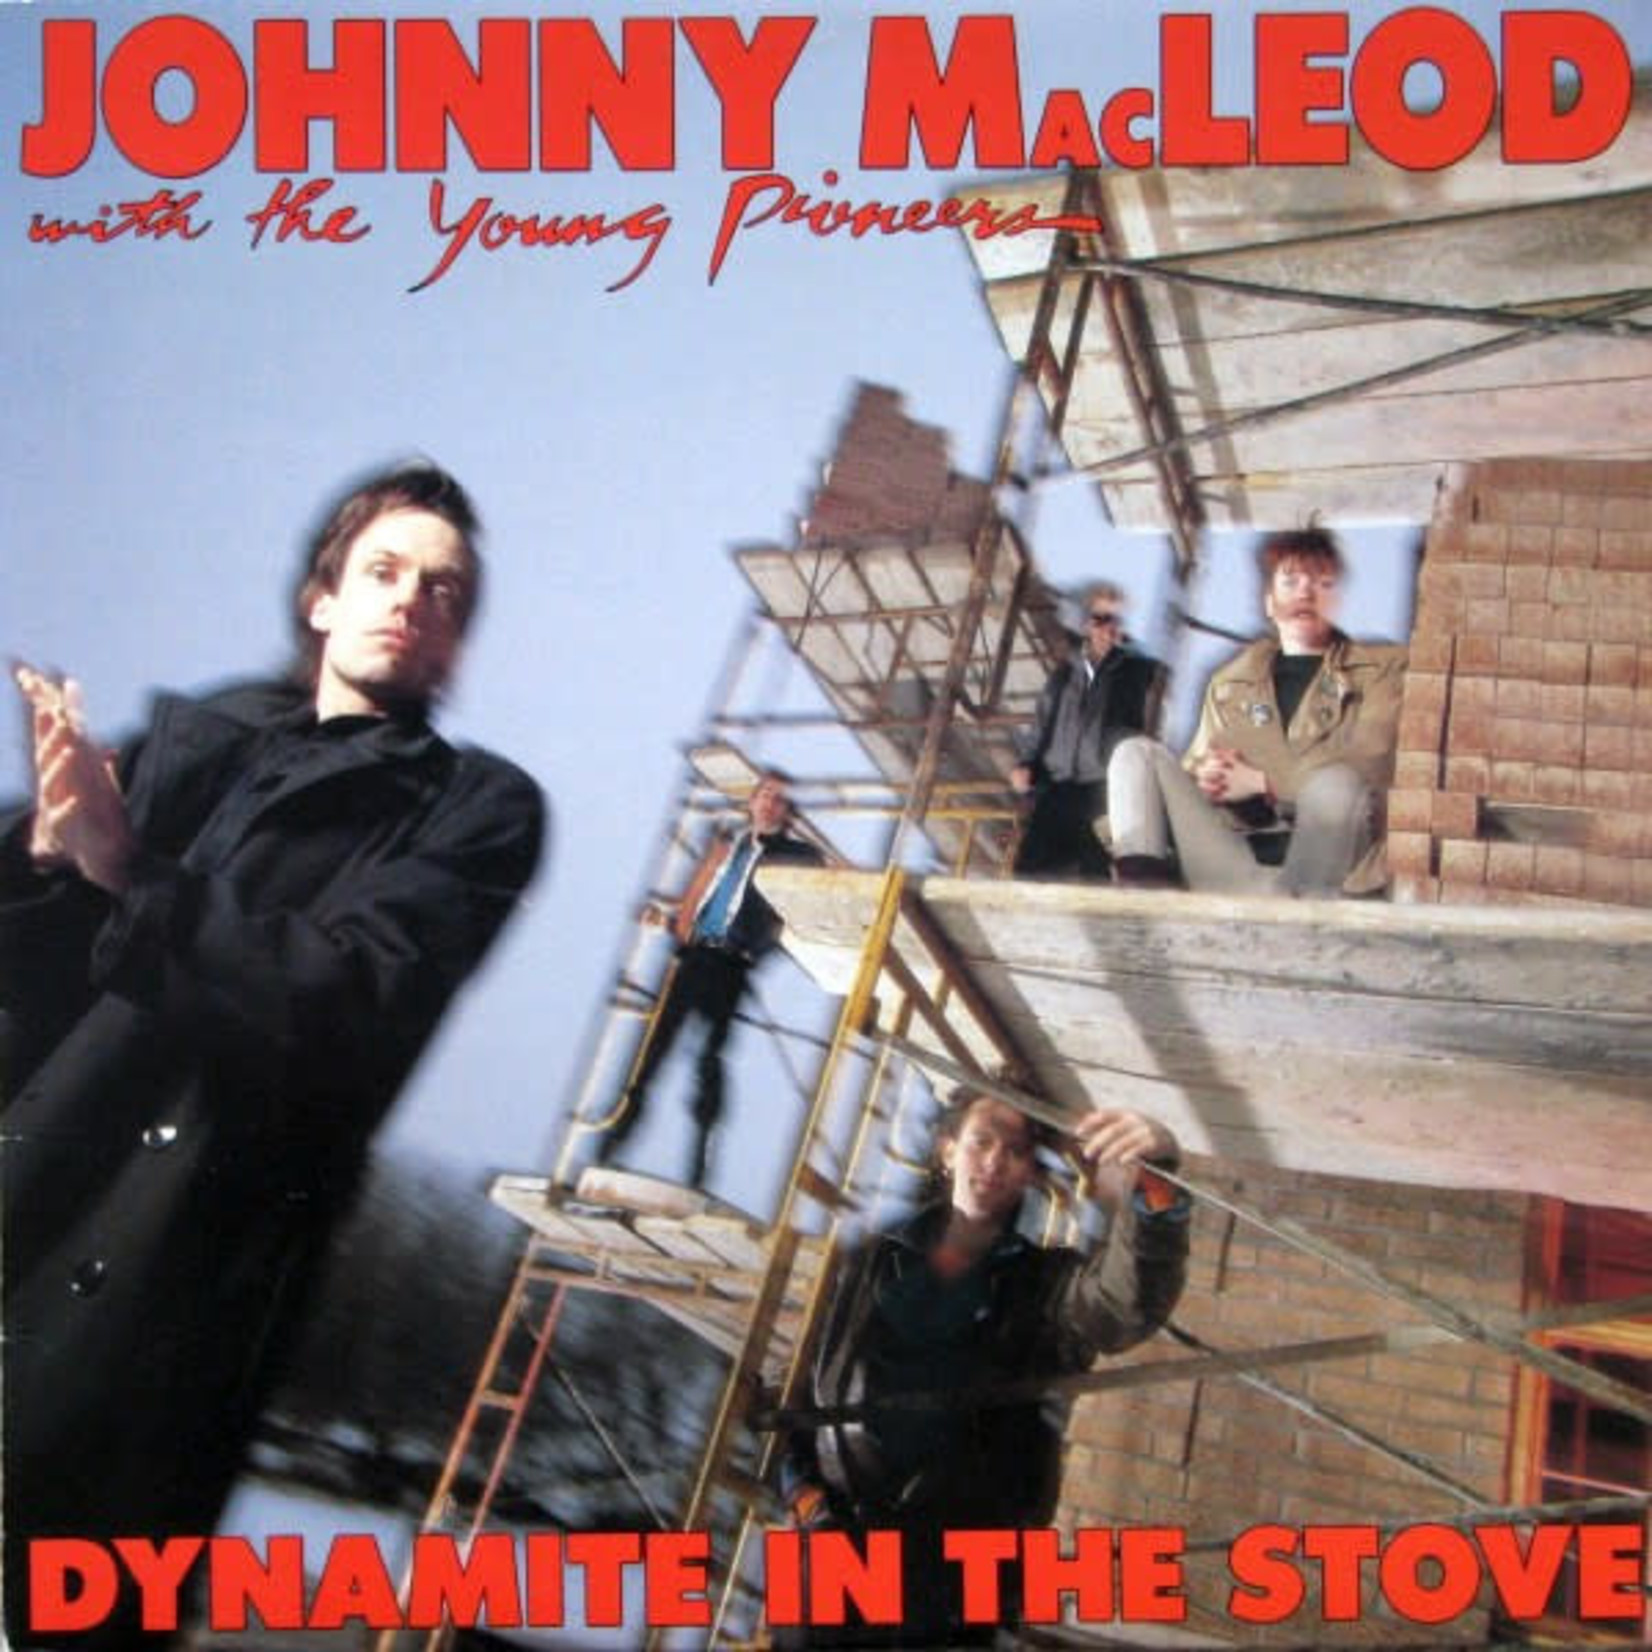 [Vintage] Johnny Macleod with Young Pioneers - Dynamite in the Stove